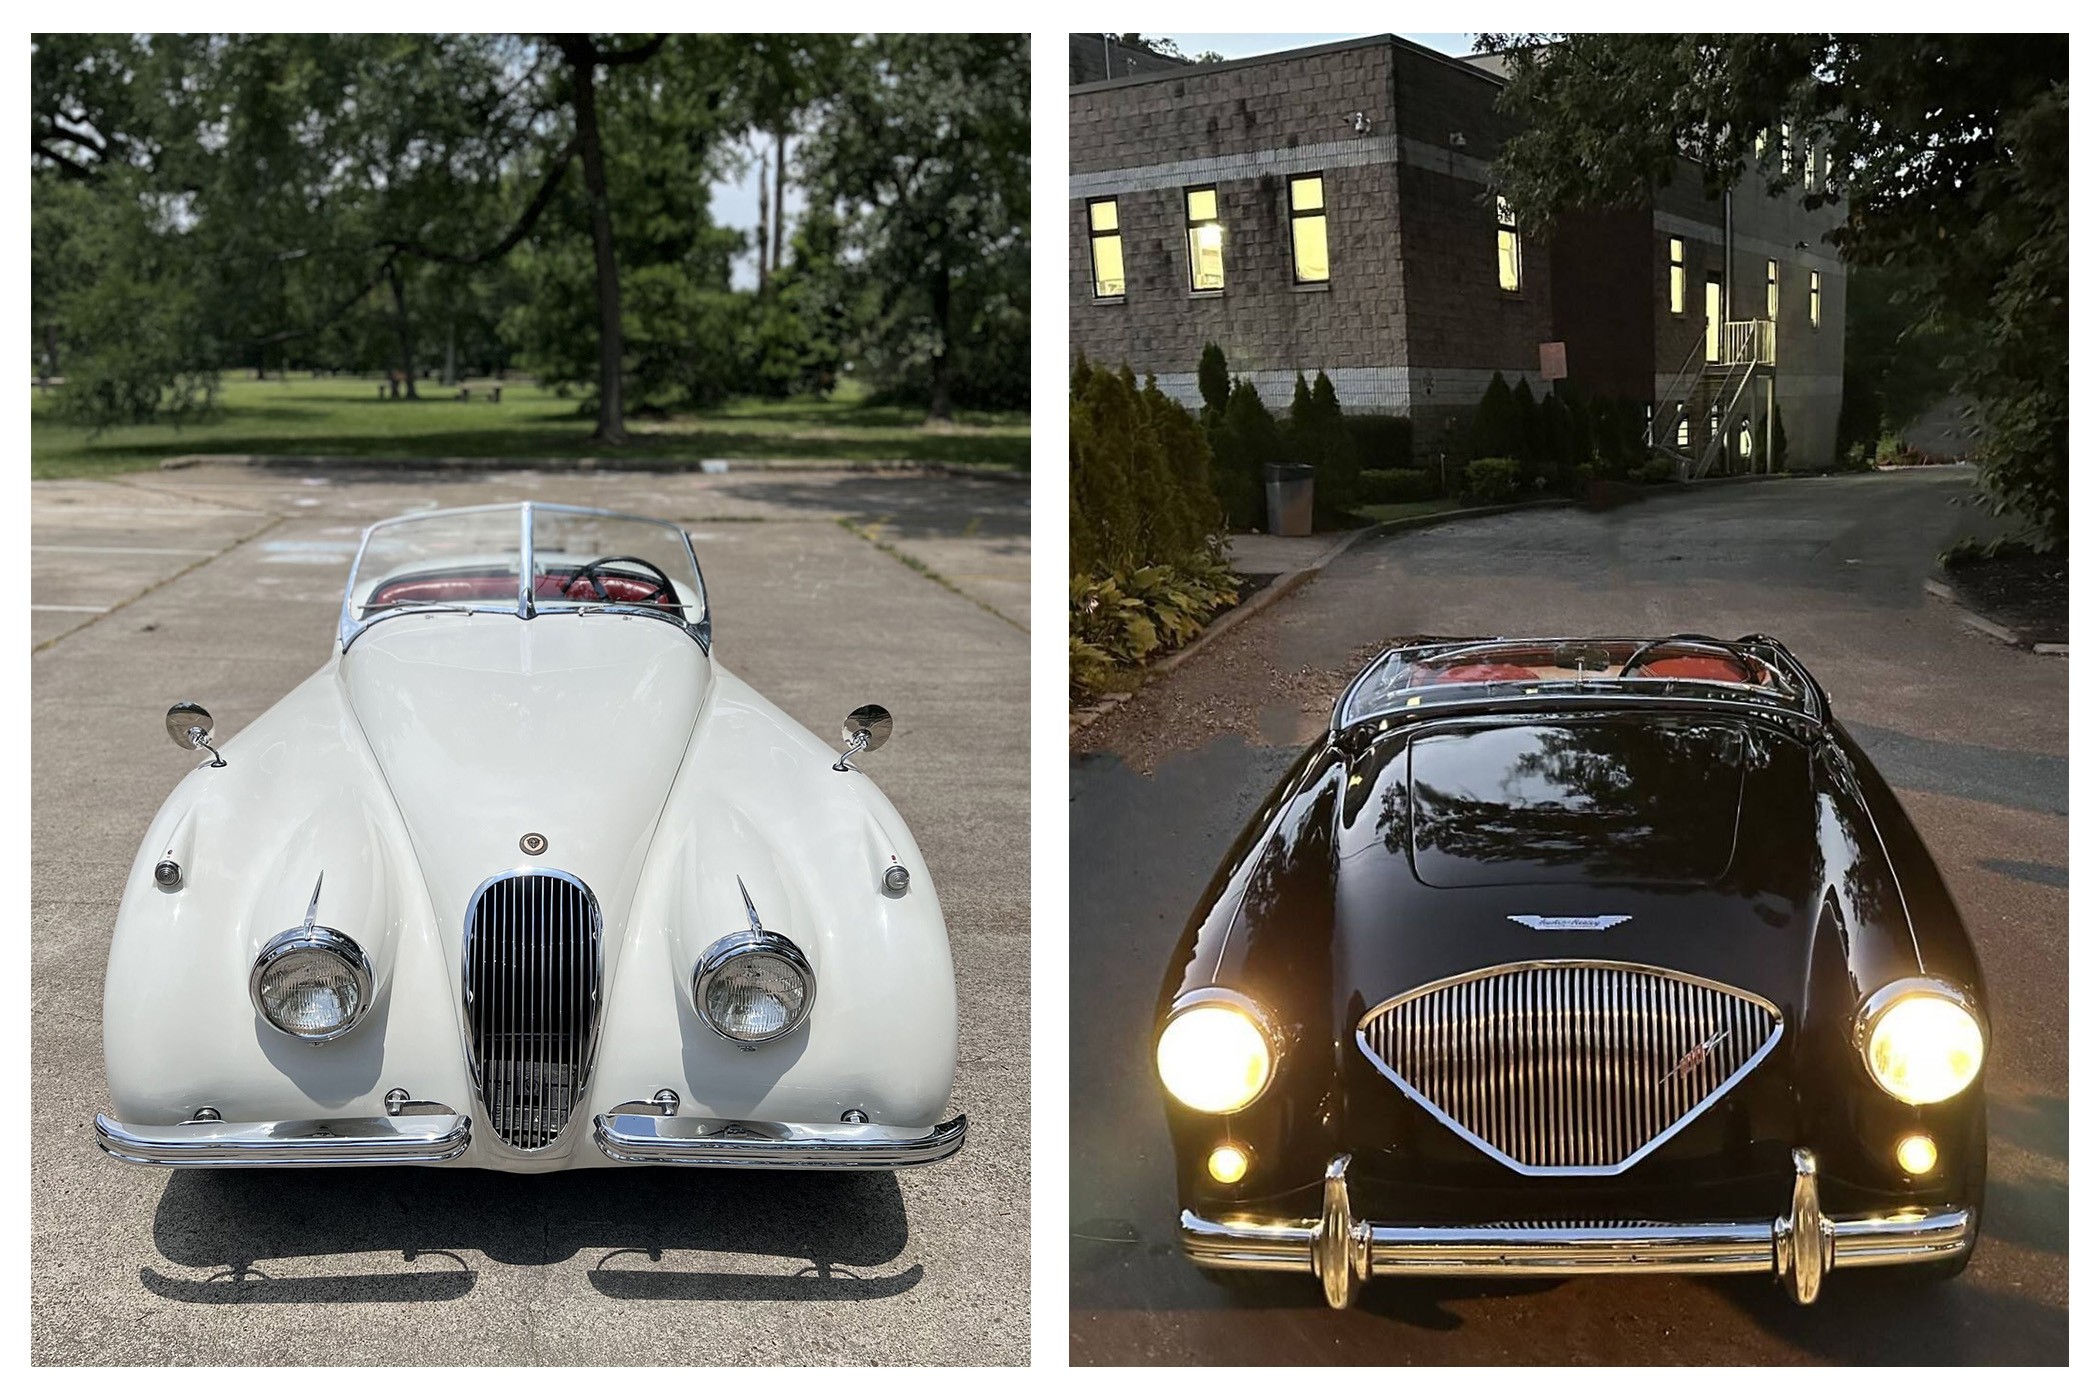 Which Fifties British Roadster Would You Rather Drive: a Jaguar XK120 or an Austin-Healey 100?